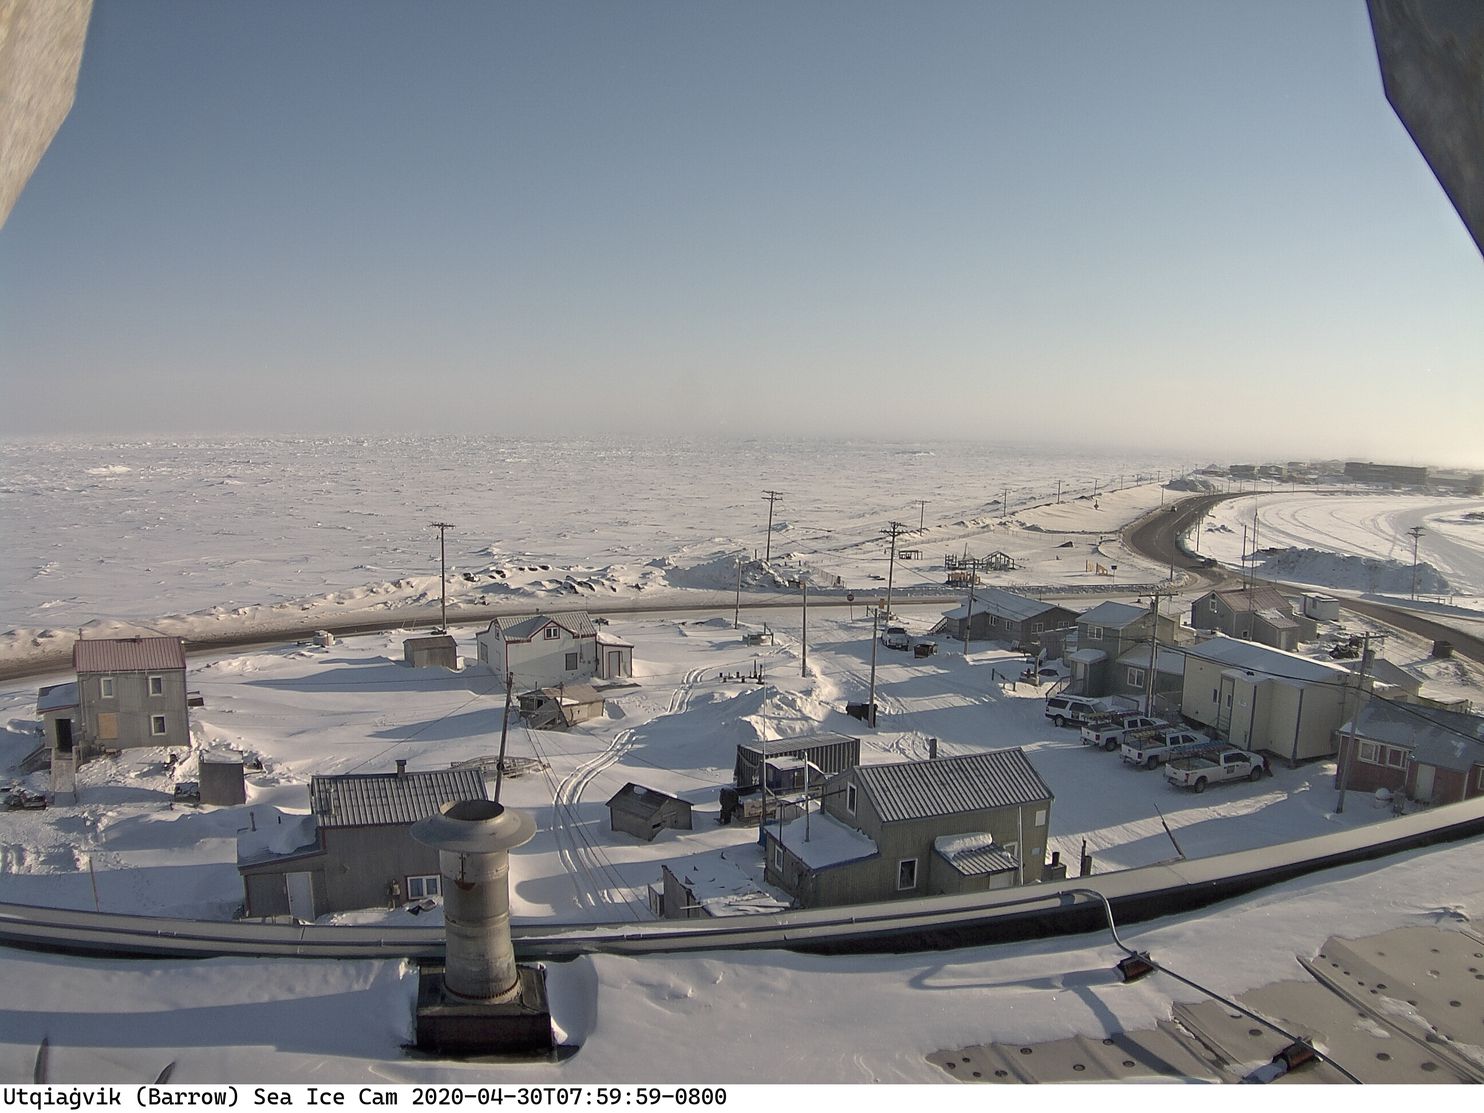 America’s northernmost city just recorded its first record low temperature in 13 years